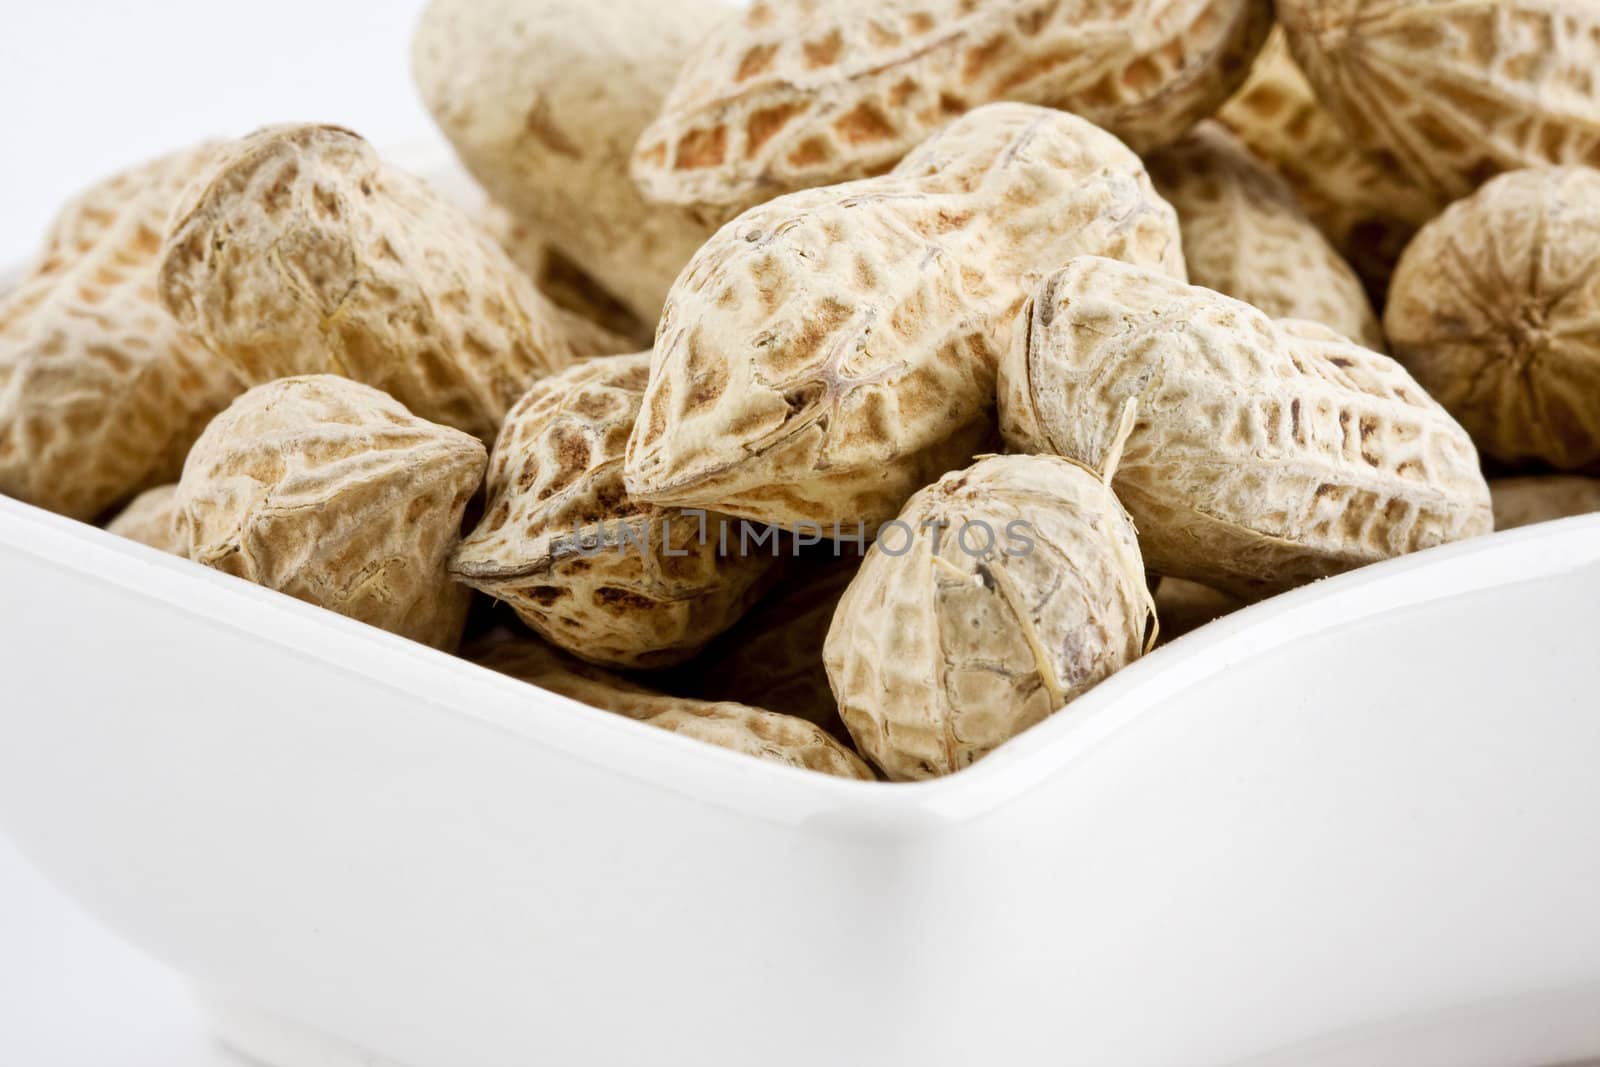 Peanut in shell snack on white plate - shallow DOF focus in the middle